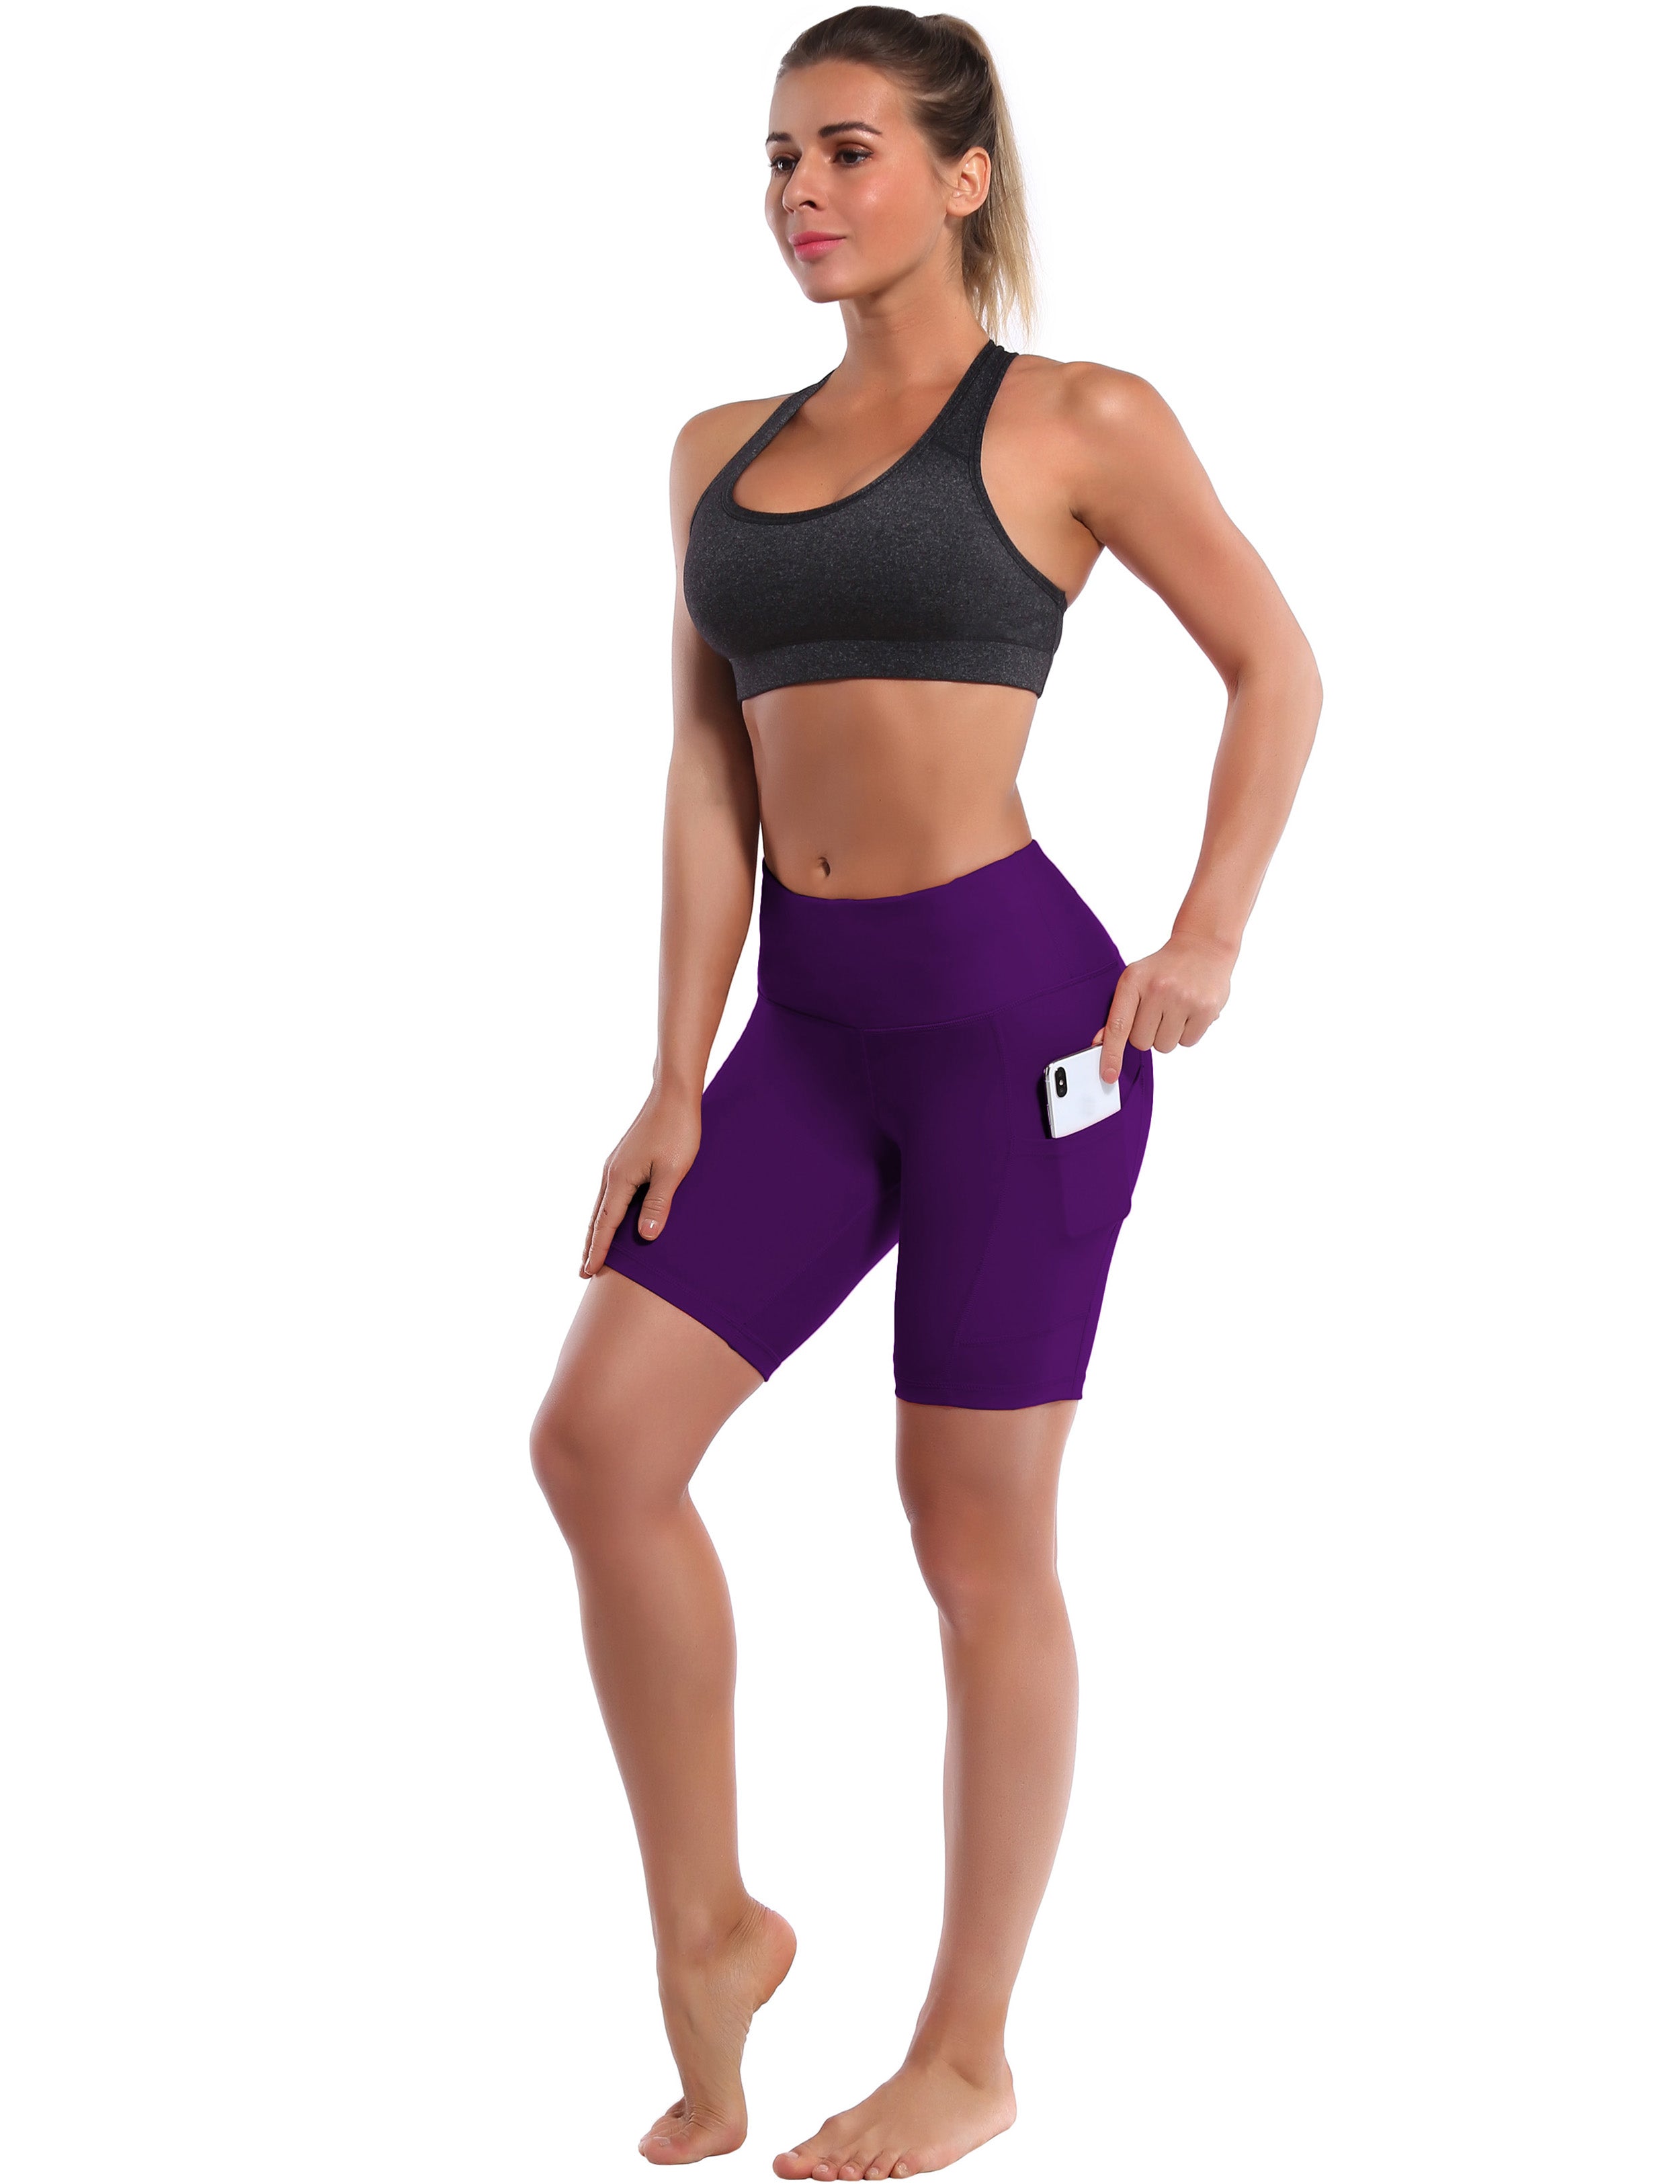 8" Side Pockets yogastudio Shorts eggplantpurple Sleek, soft, smooth and totally comfortable: our newest style is here. Softest-ever fabric High elasticity High density 4-way stretch Fabric doesn't attract lint easily No see-through Moisture-wicking Machine wash 75% Nylon, 25% Spandex